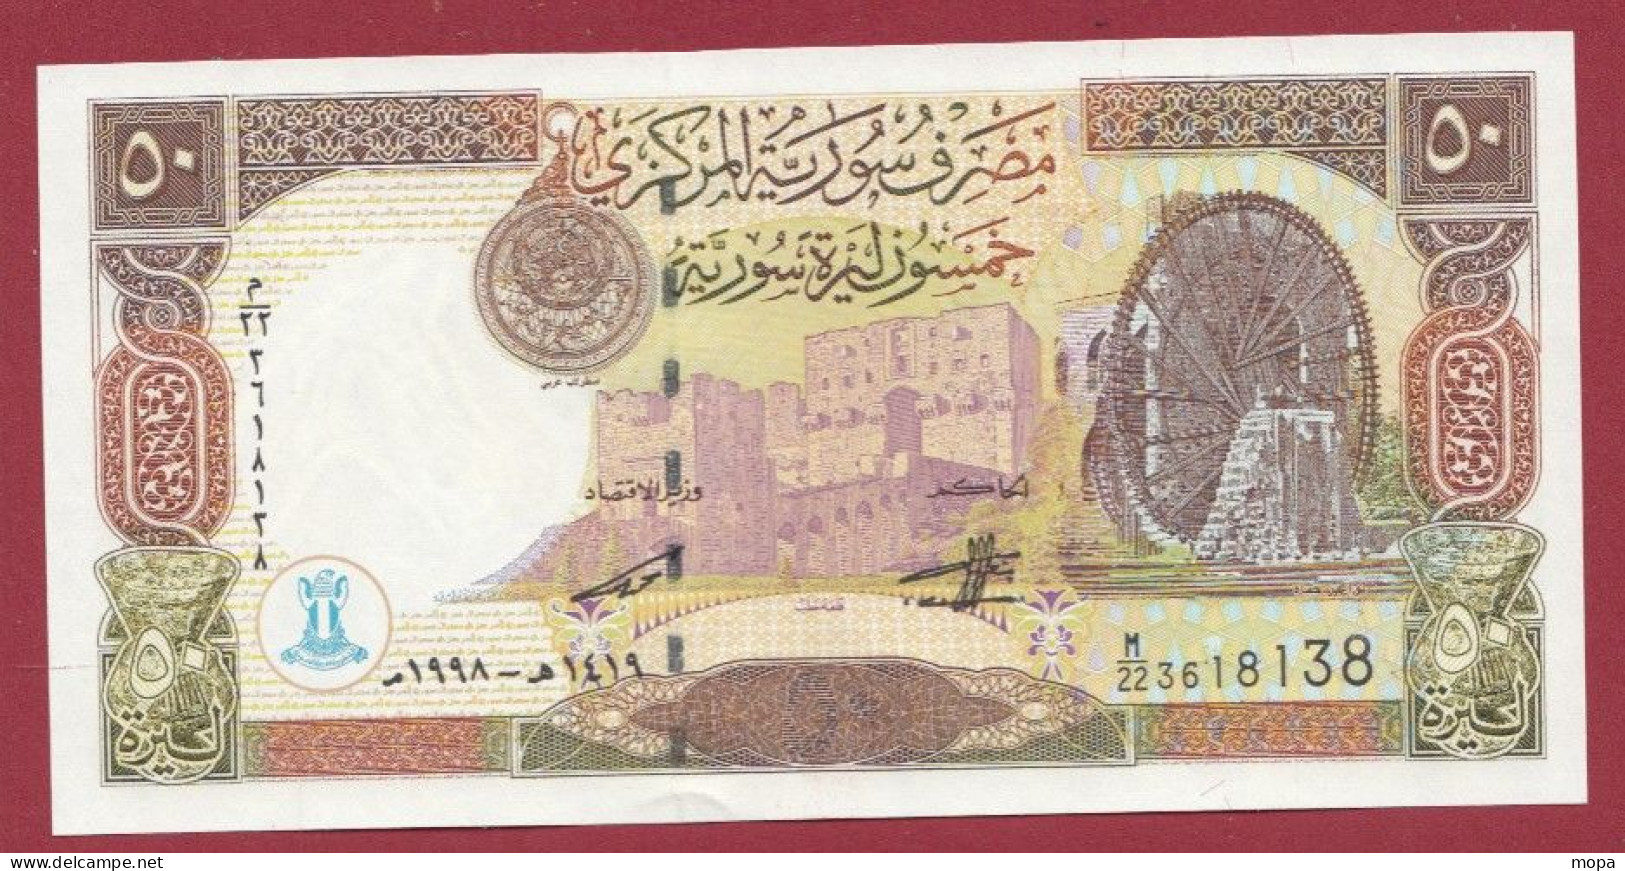 Syrie 50 Pounds --1998 --NEUF/UNC--(137) - Syrie